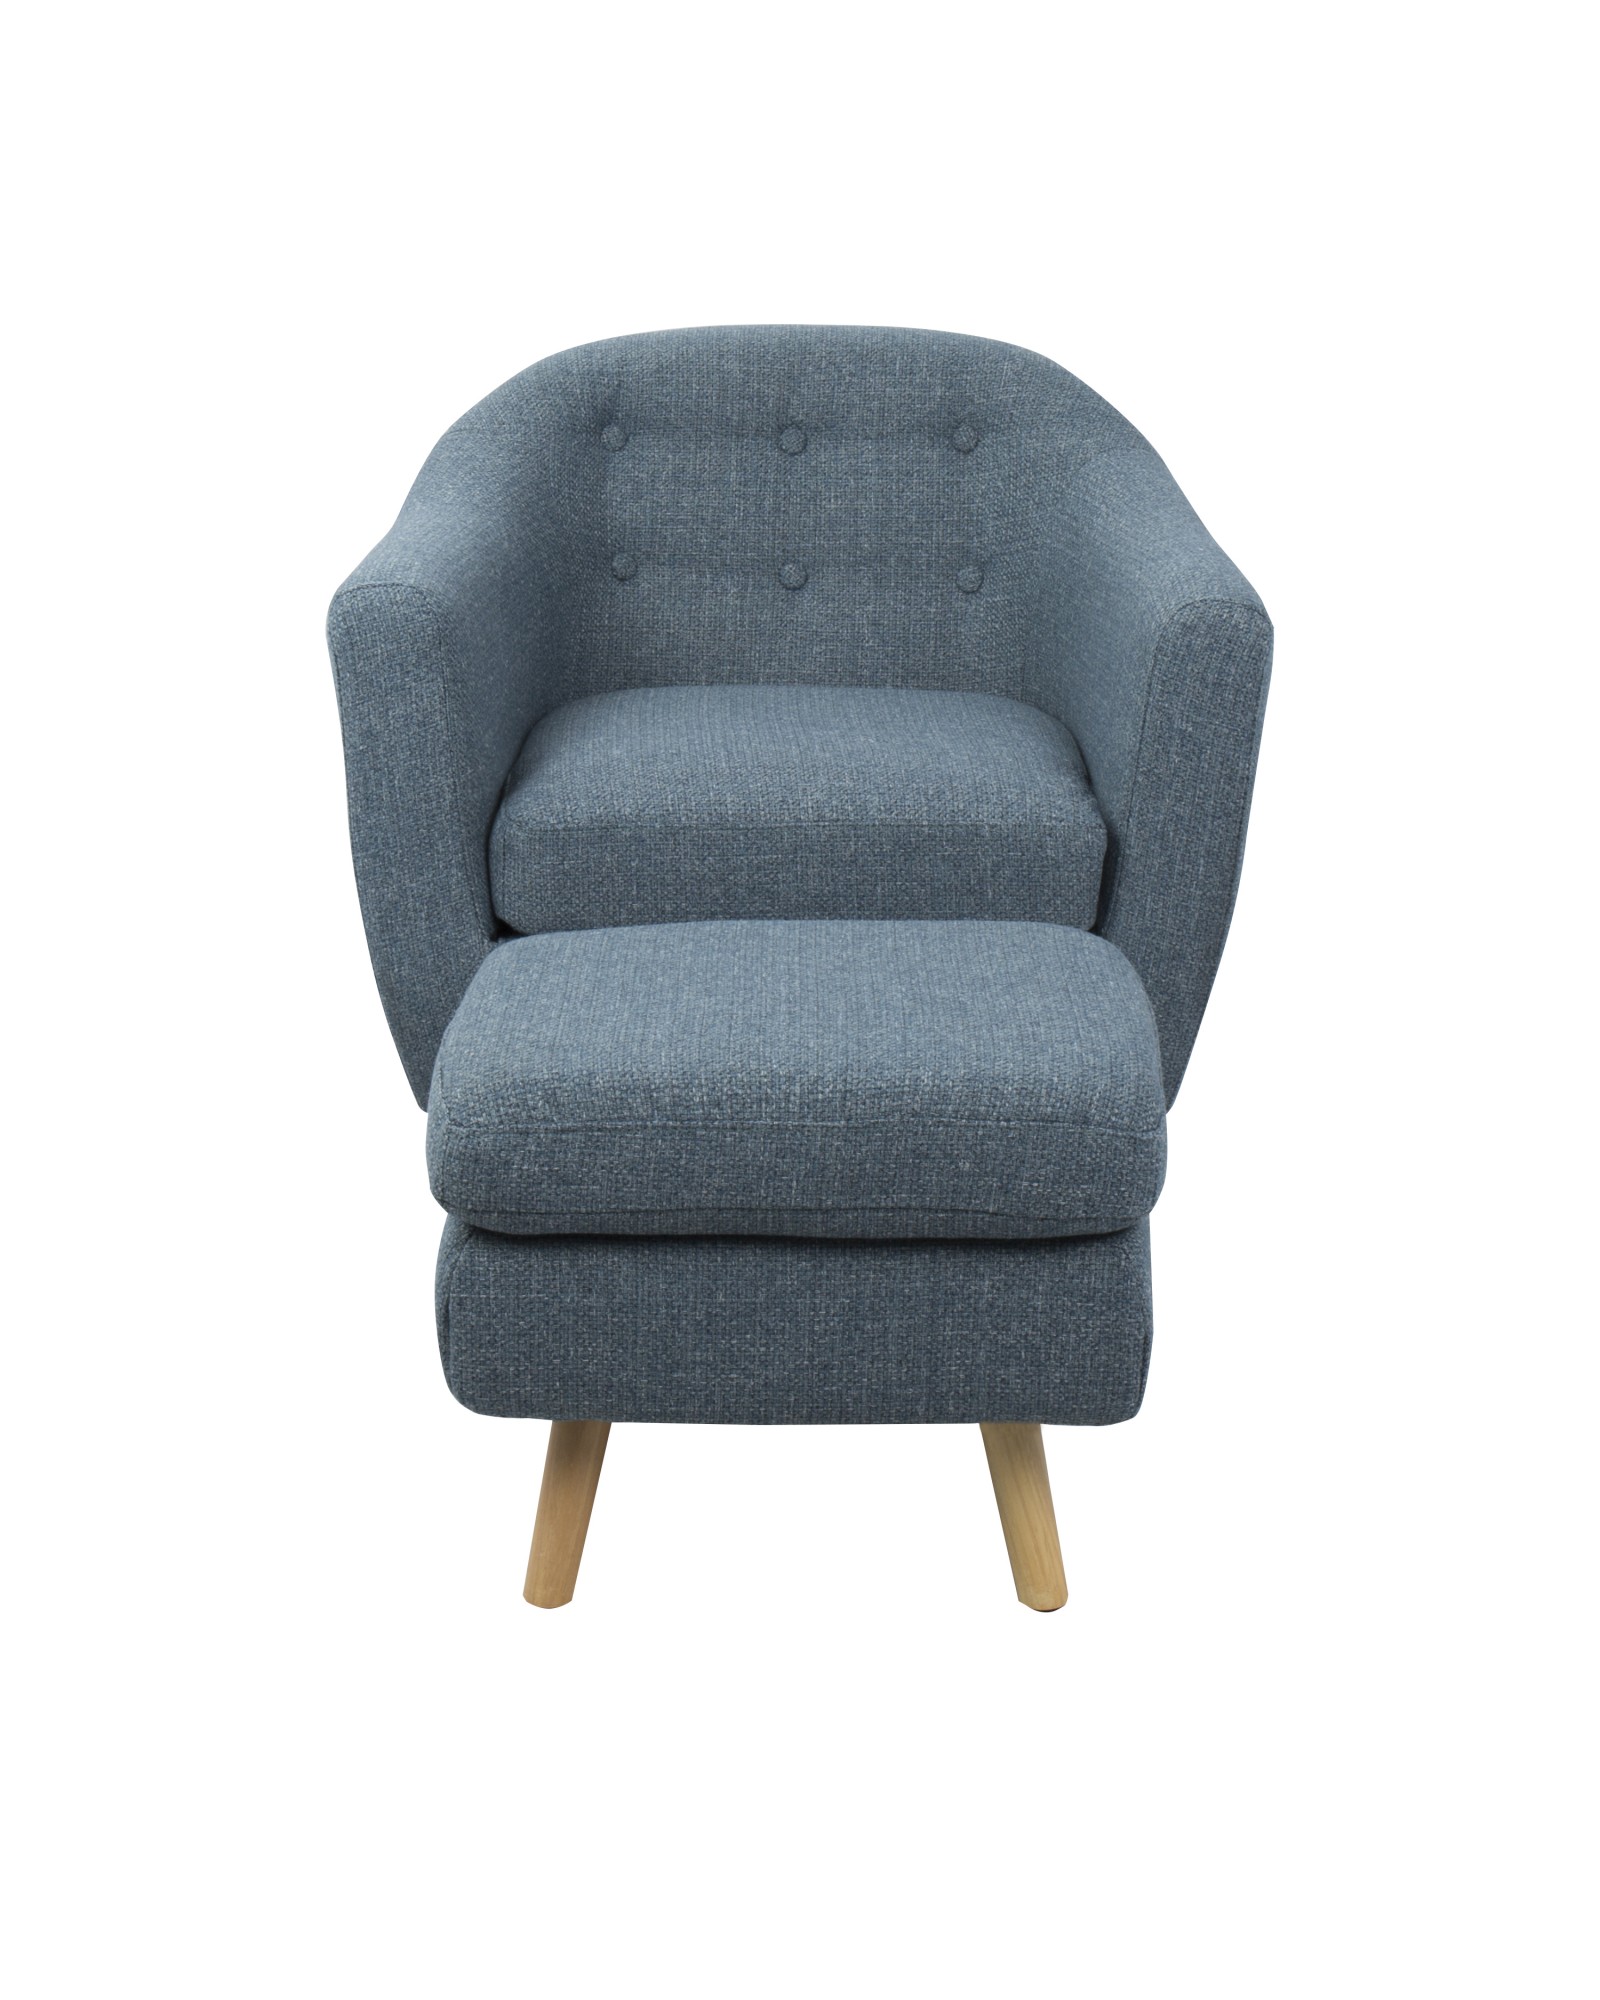 Rockwell Mid-Century Modern Accent Chair and Ottoman in Blue Noise Fabric